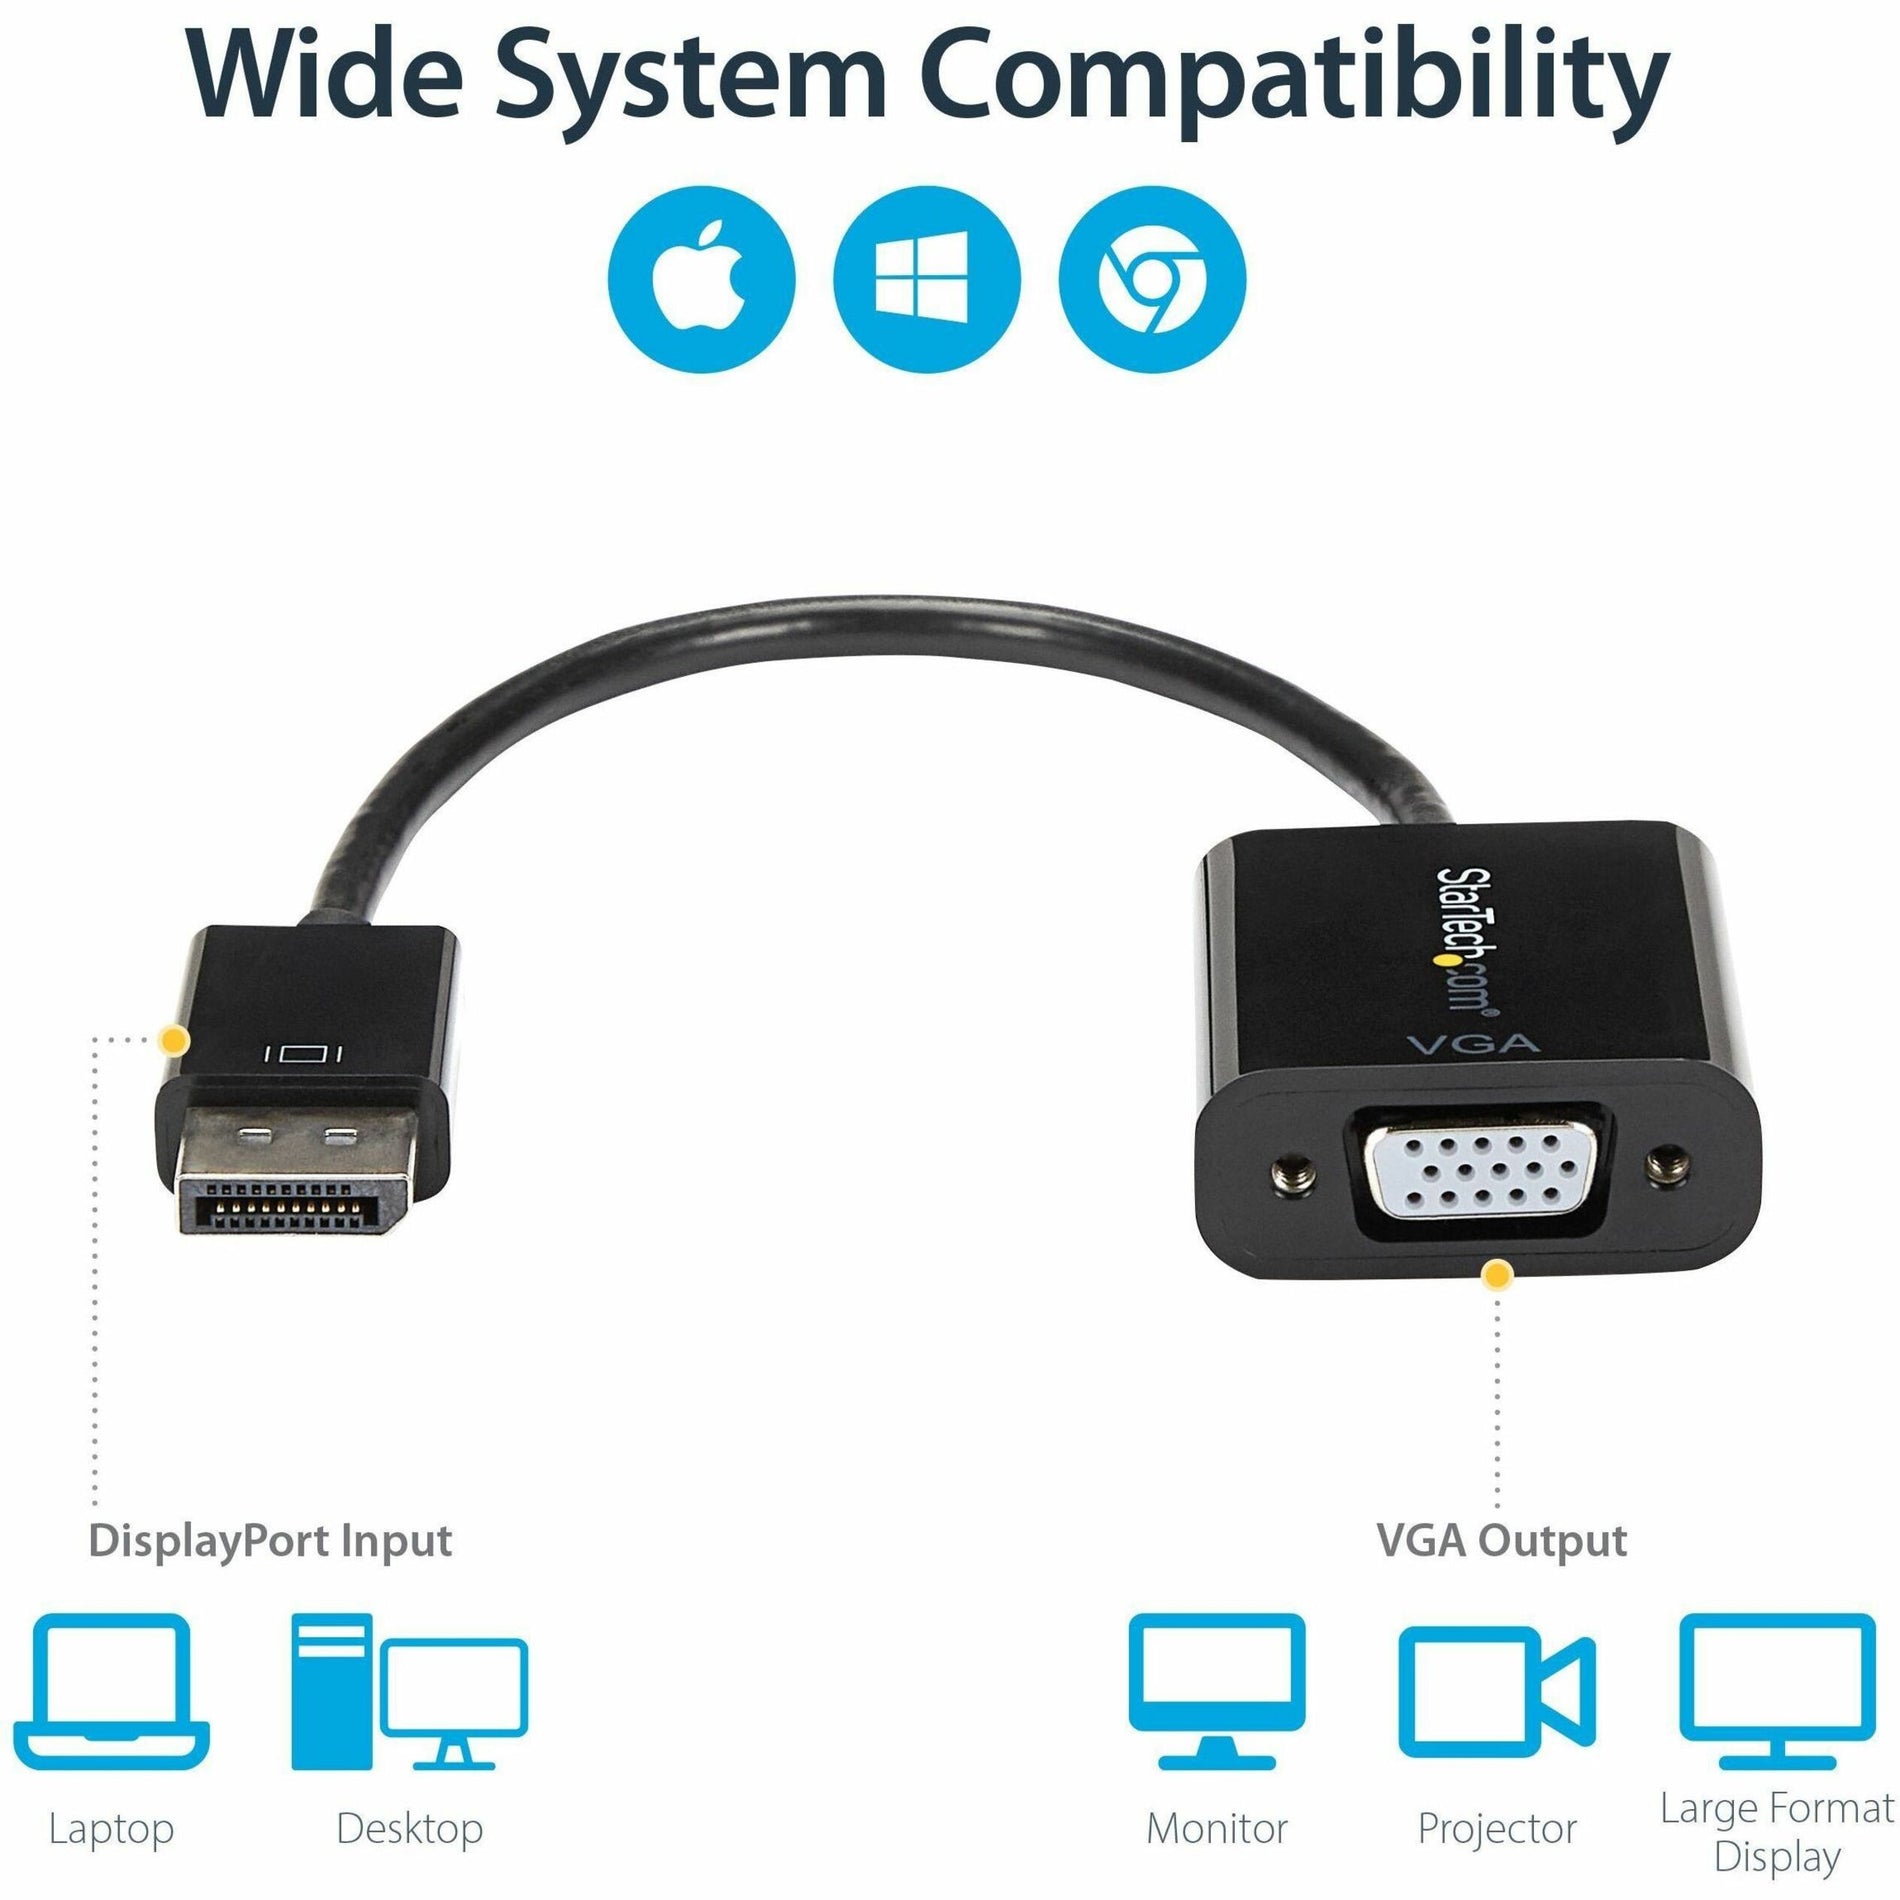 StarTech.com DP2VGA3 DisplayPort 1.2 to VGA Adapter Converter - Active, Plug and Play, 2048 x 1152 Resolution Supported